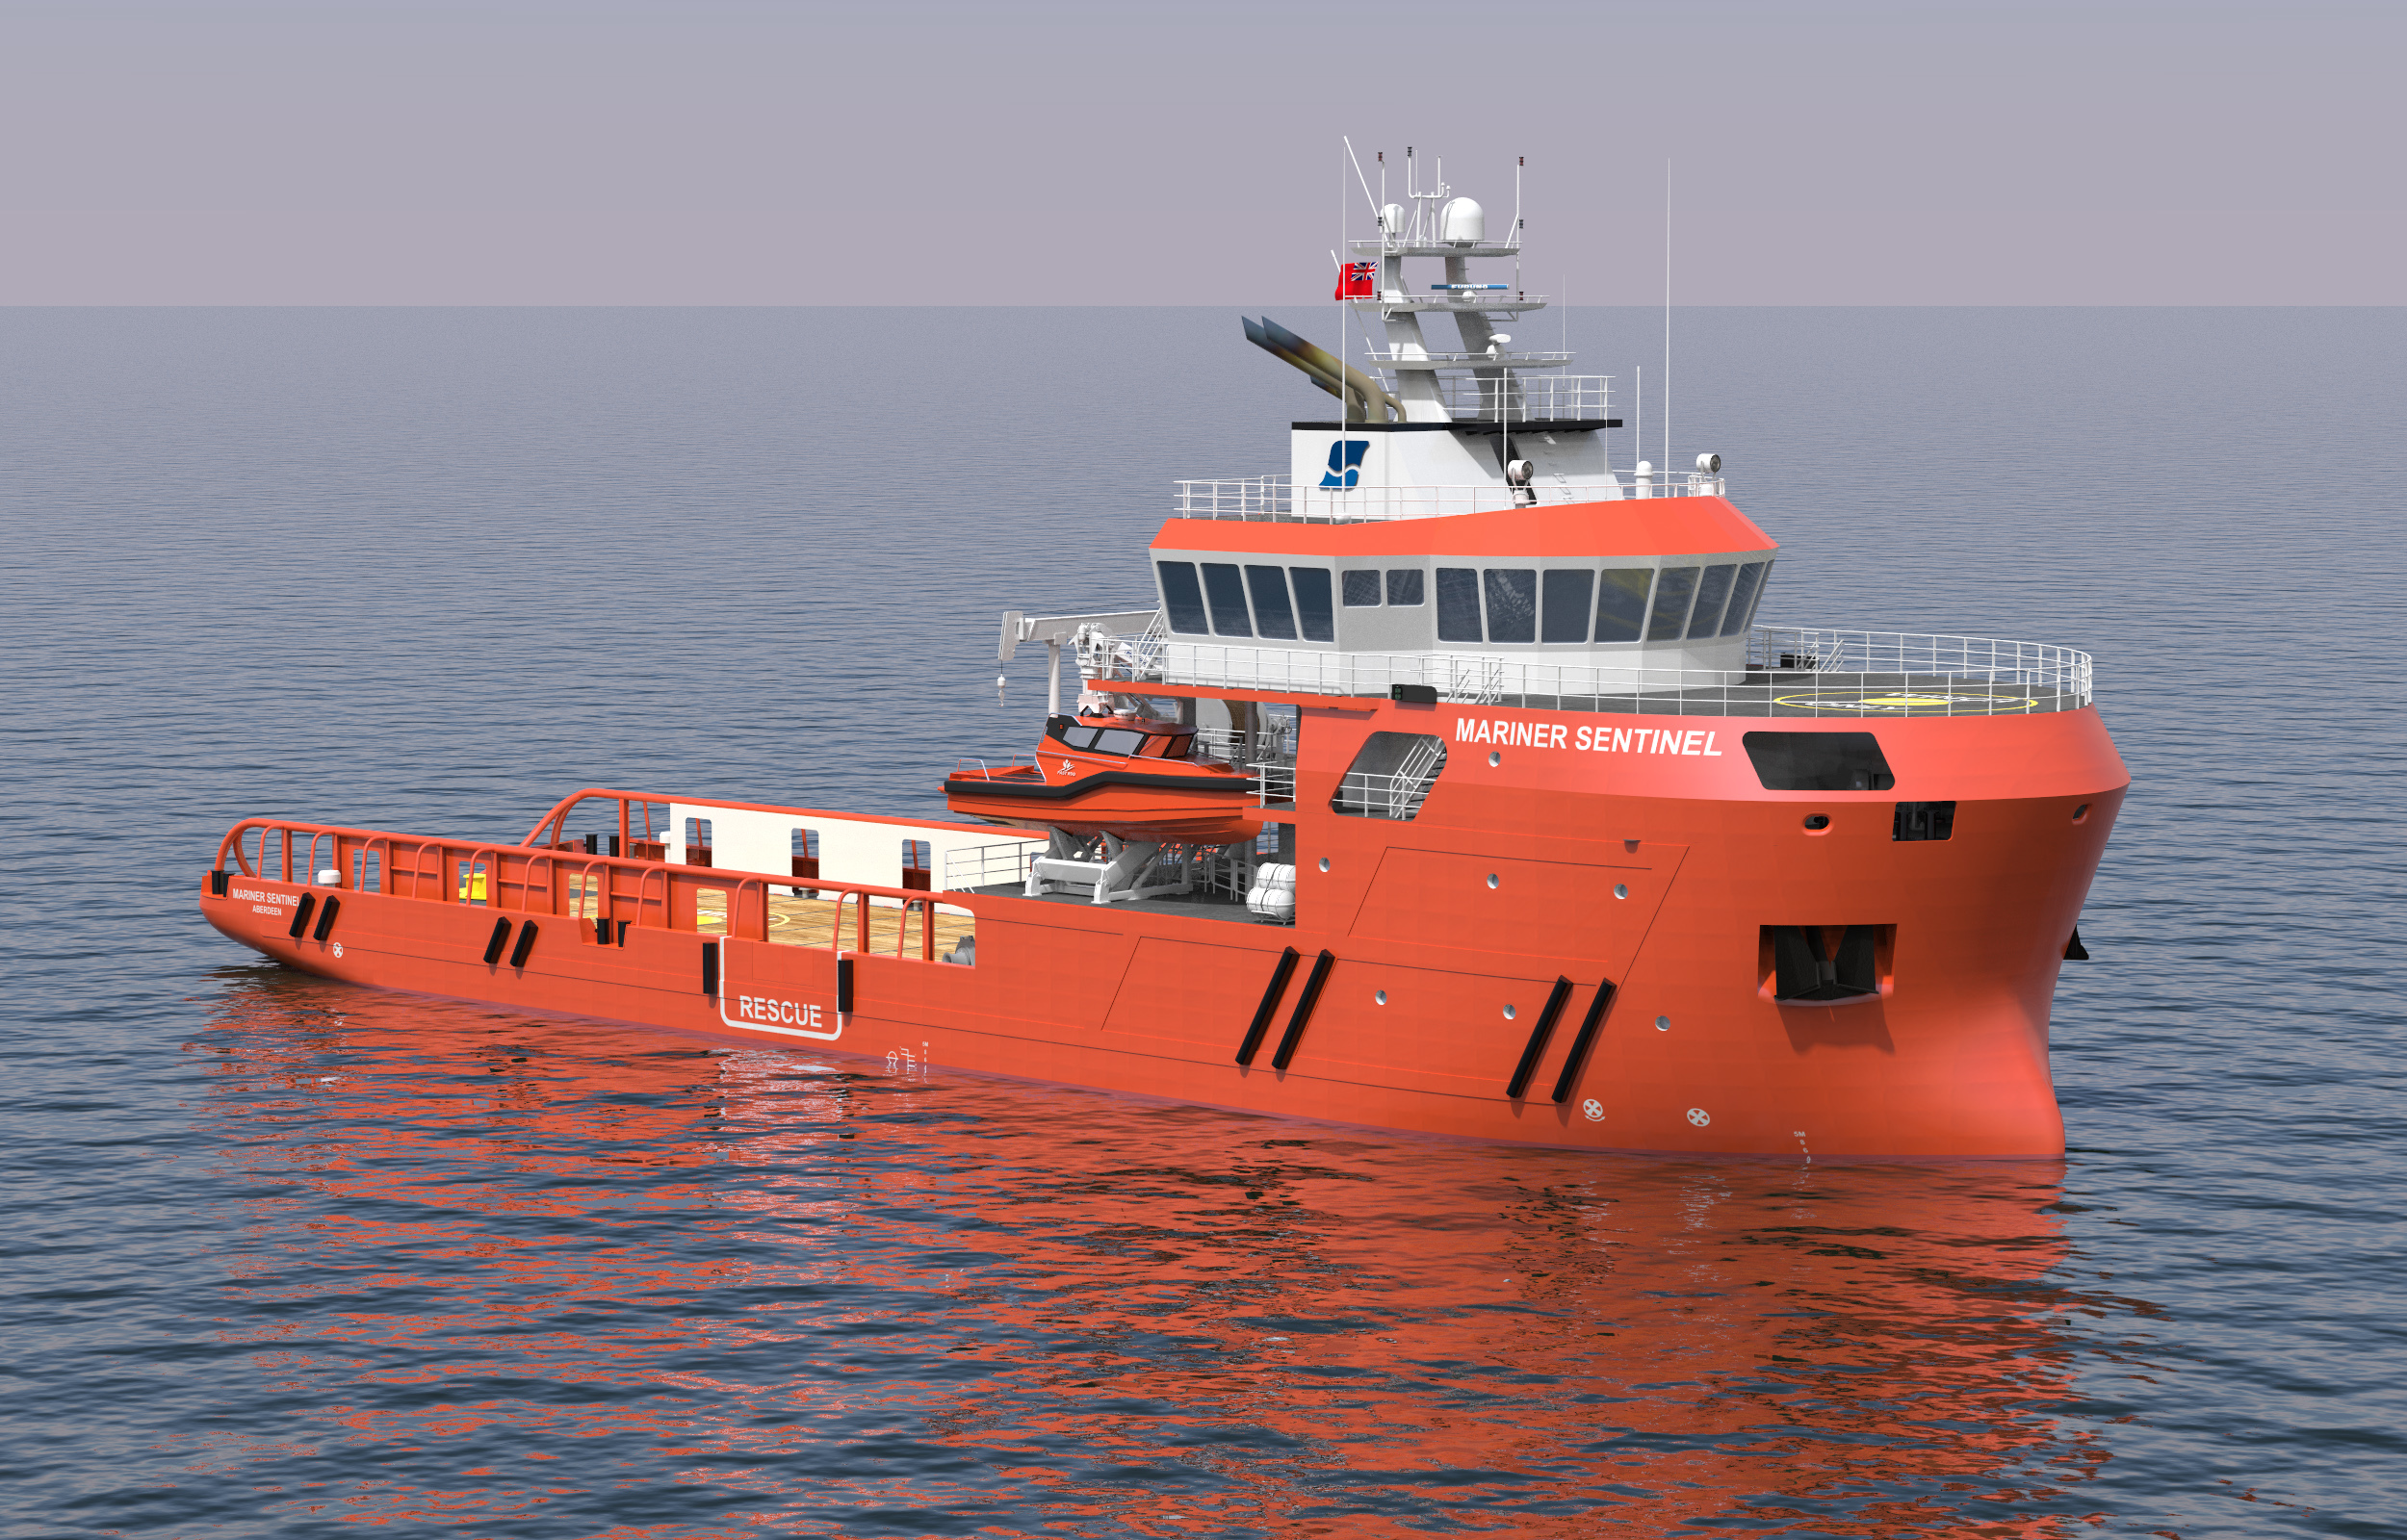 The Mariner Sentinel will be delivered in 2017